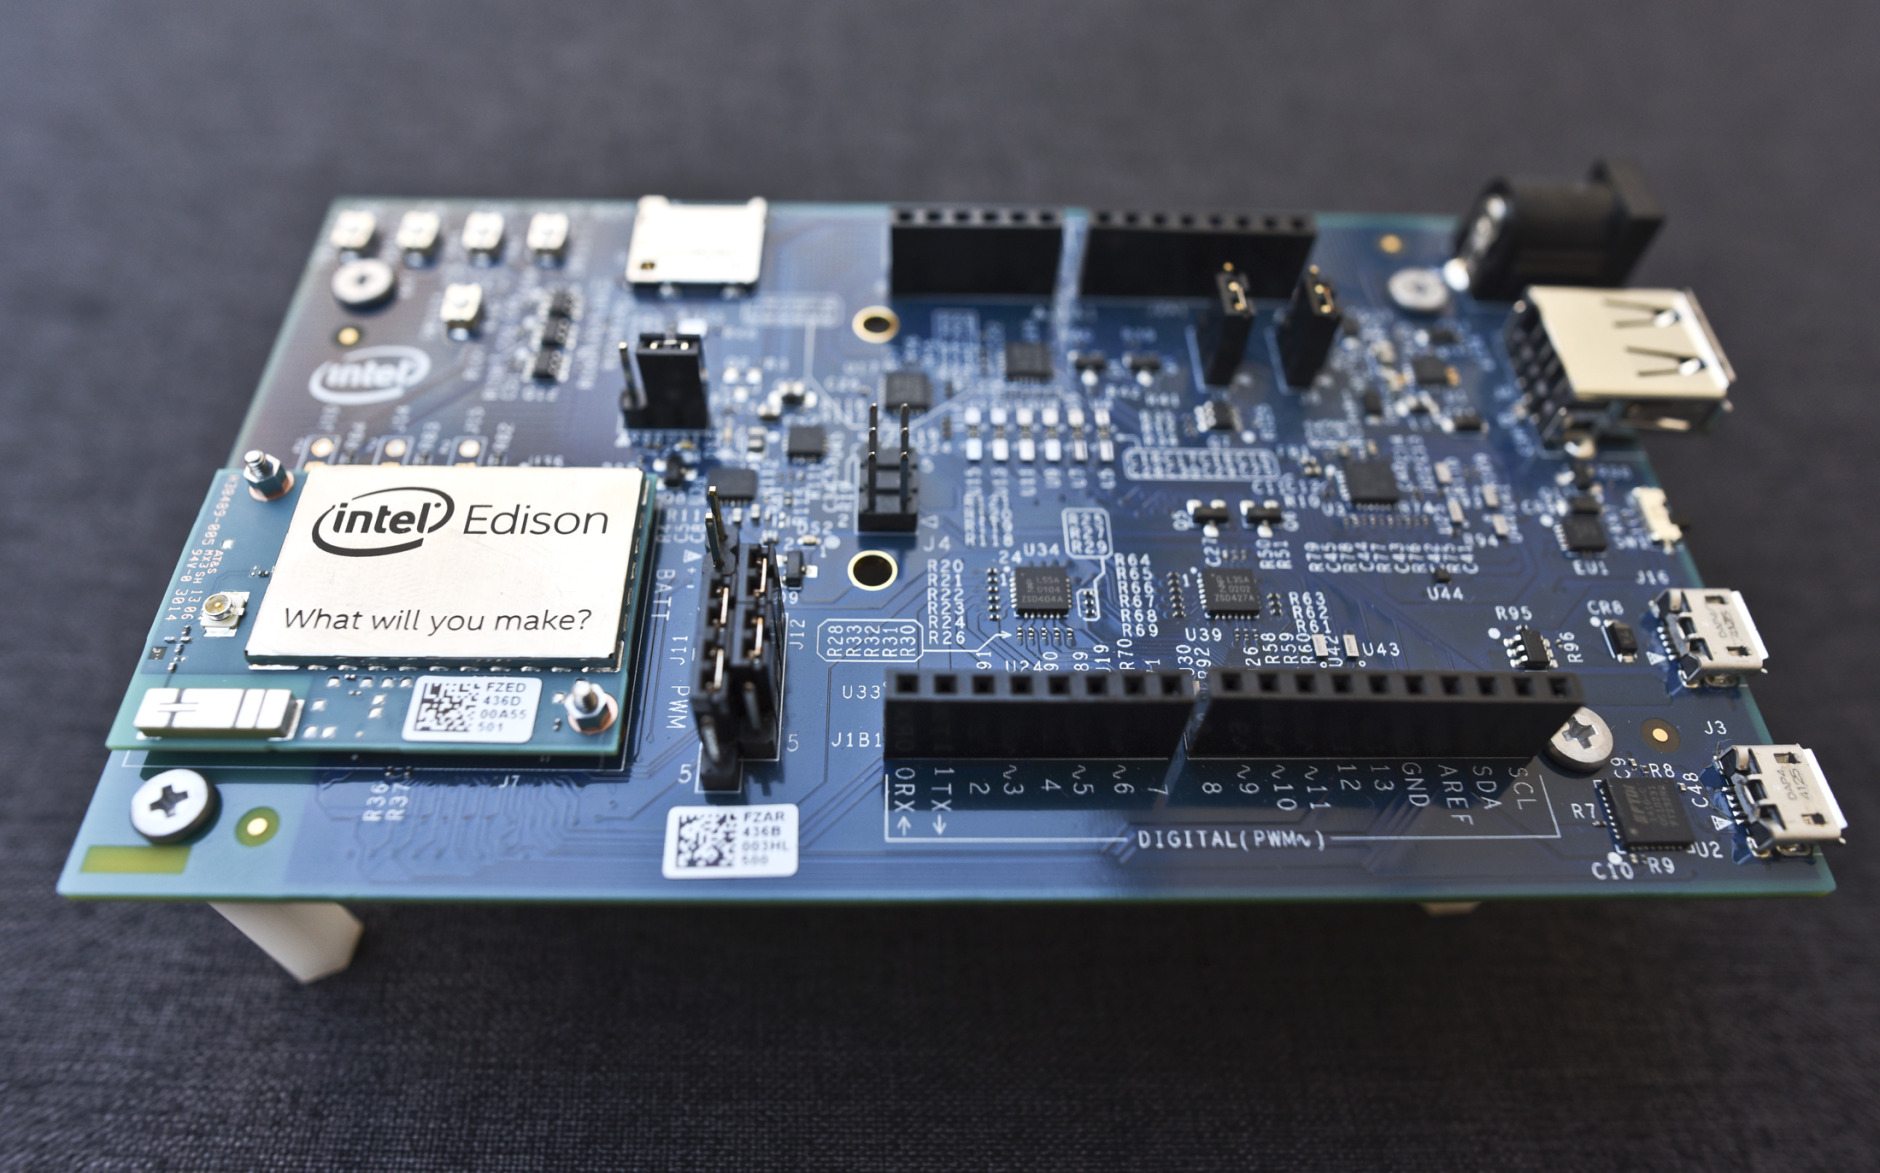 This Wednesday, Dec. 10, 2014 photo shows the Intel Edison, a small programmable computer the size of an SD memory card, seated on an electronics expansion board, in Decatur, Ga. The Edison has both Wi-Fi and Bluetooth technology built in, as well as a full distribution of the Linux operating system. (AP Photo/Ron Harris)